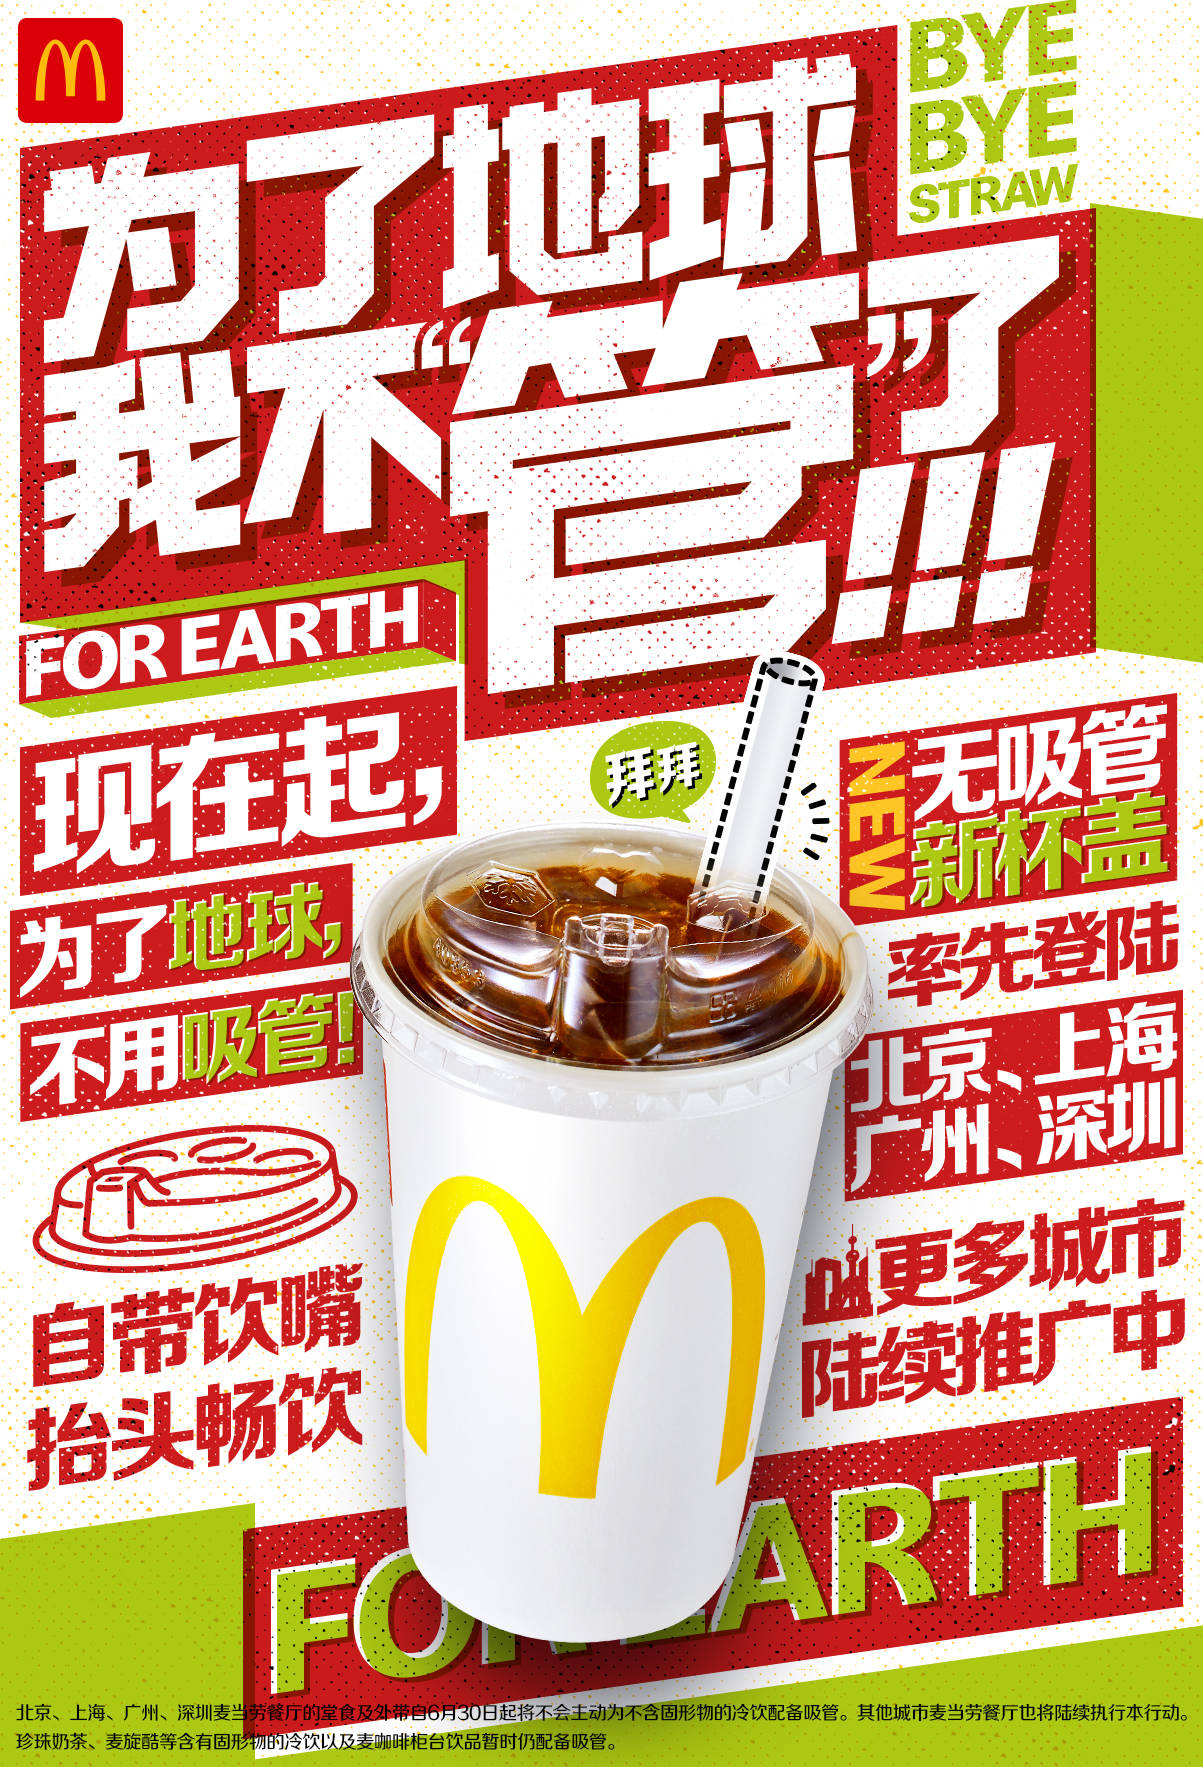 McDonald’s (China) Announces phasing out of plastic straw.